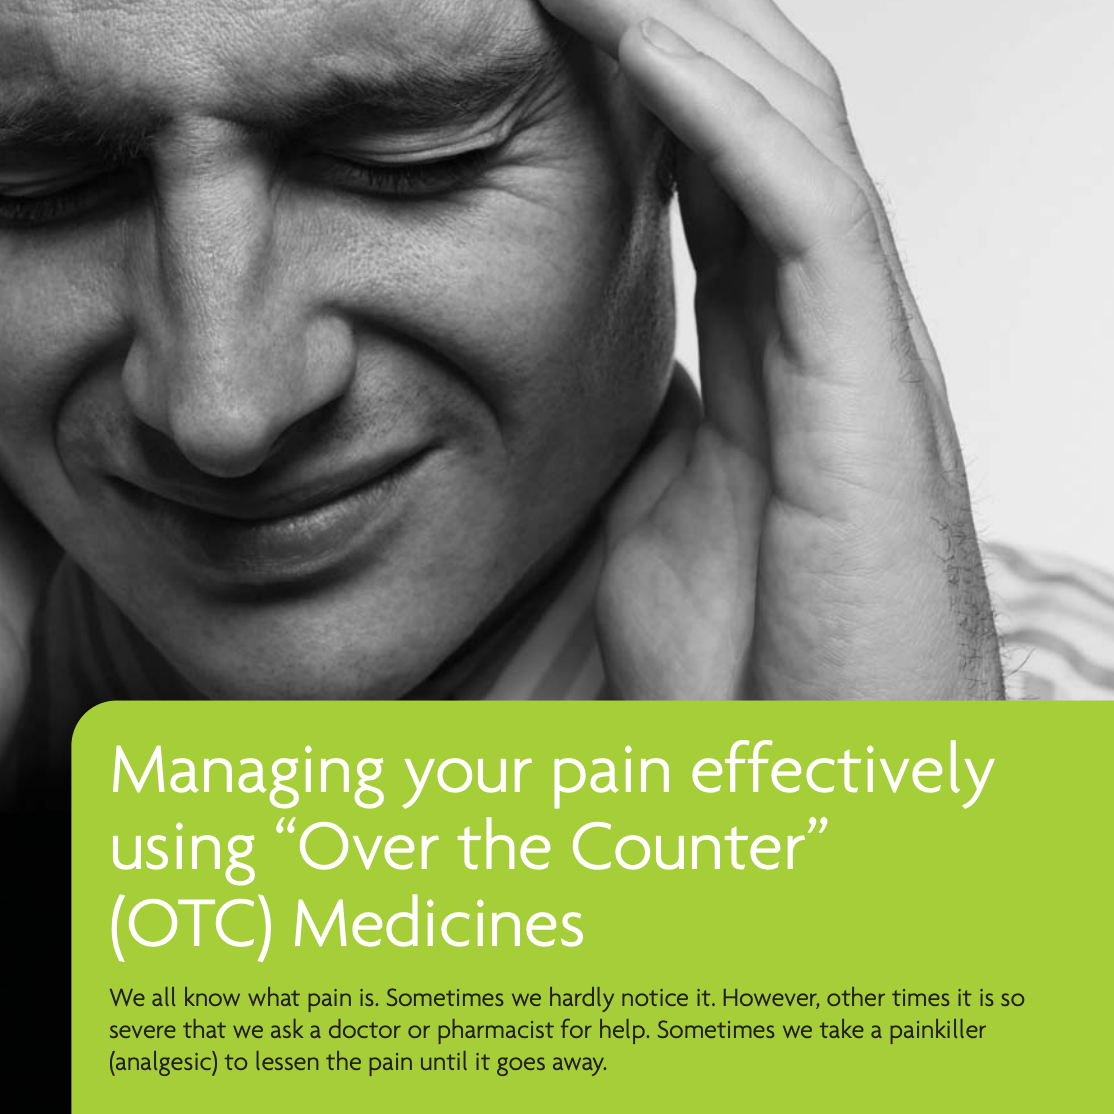 MANAGING YOUR PAIN EFFECTIVELY USING "OVER THE COUNTER" MEDICINES